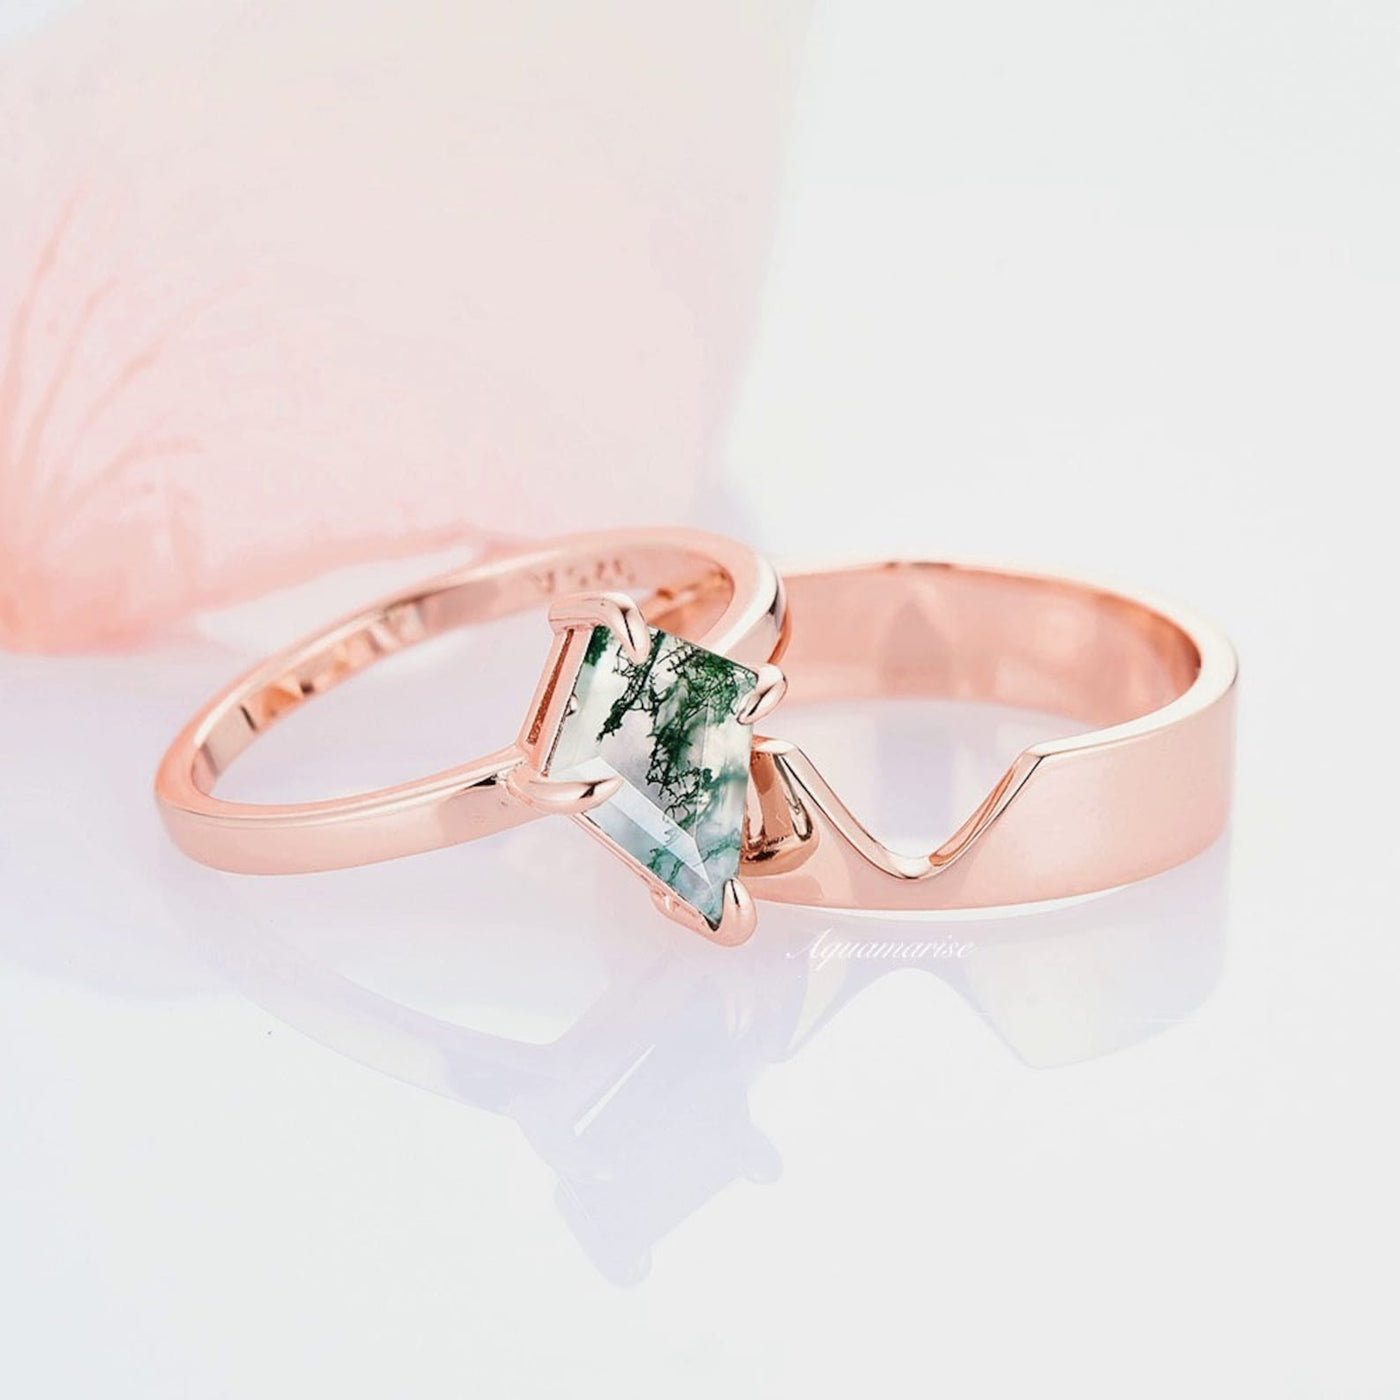 Kite Green Moss Agate His and Hers Ring Set- 14K Rose Gold Vermeil Couples Ring